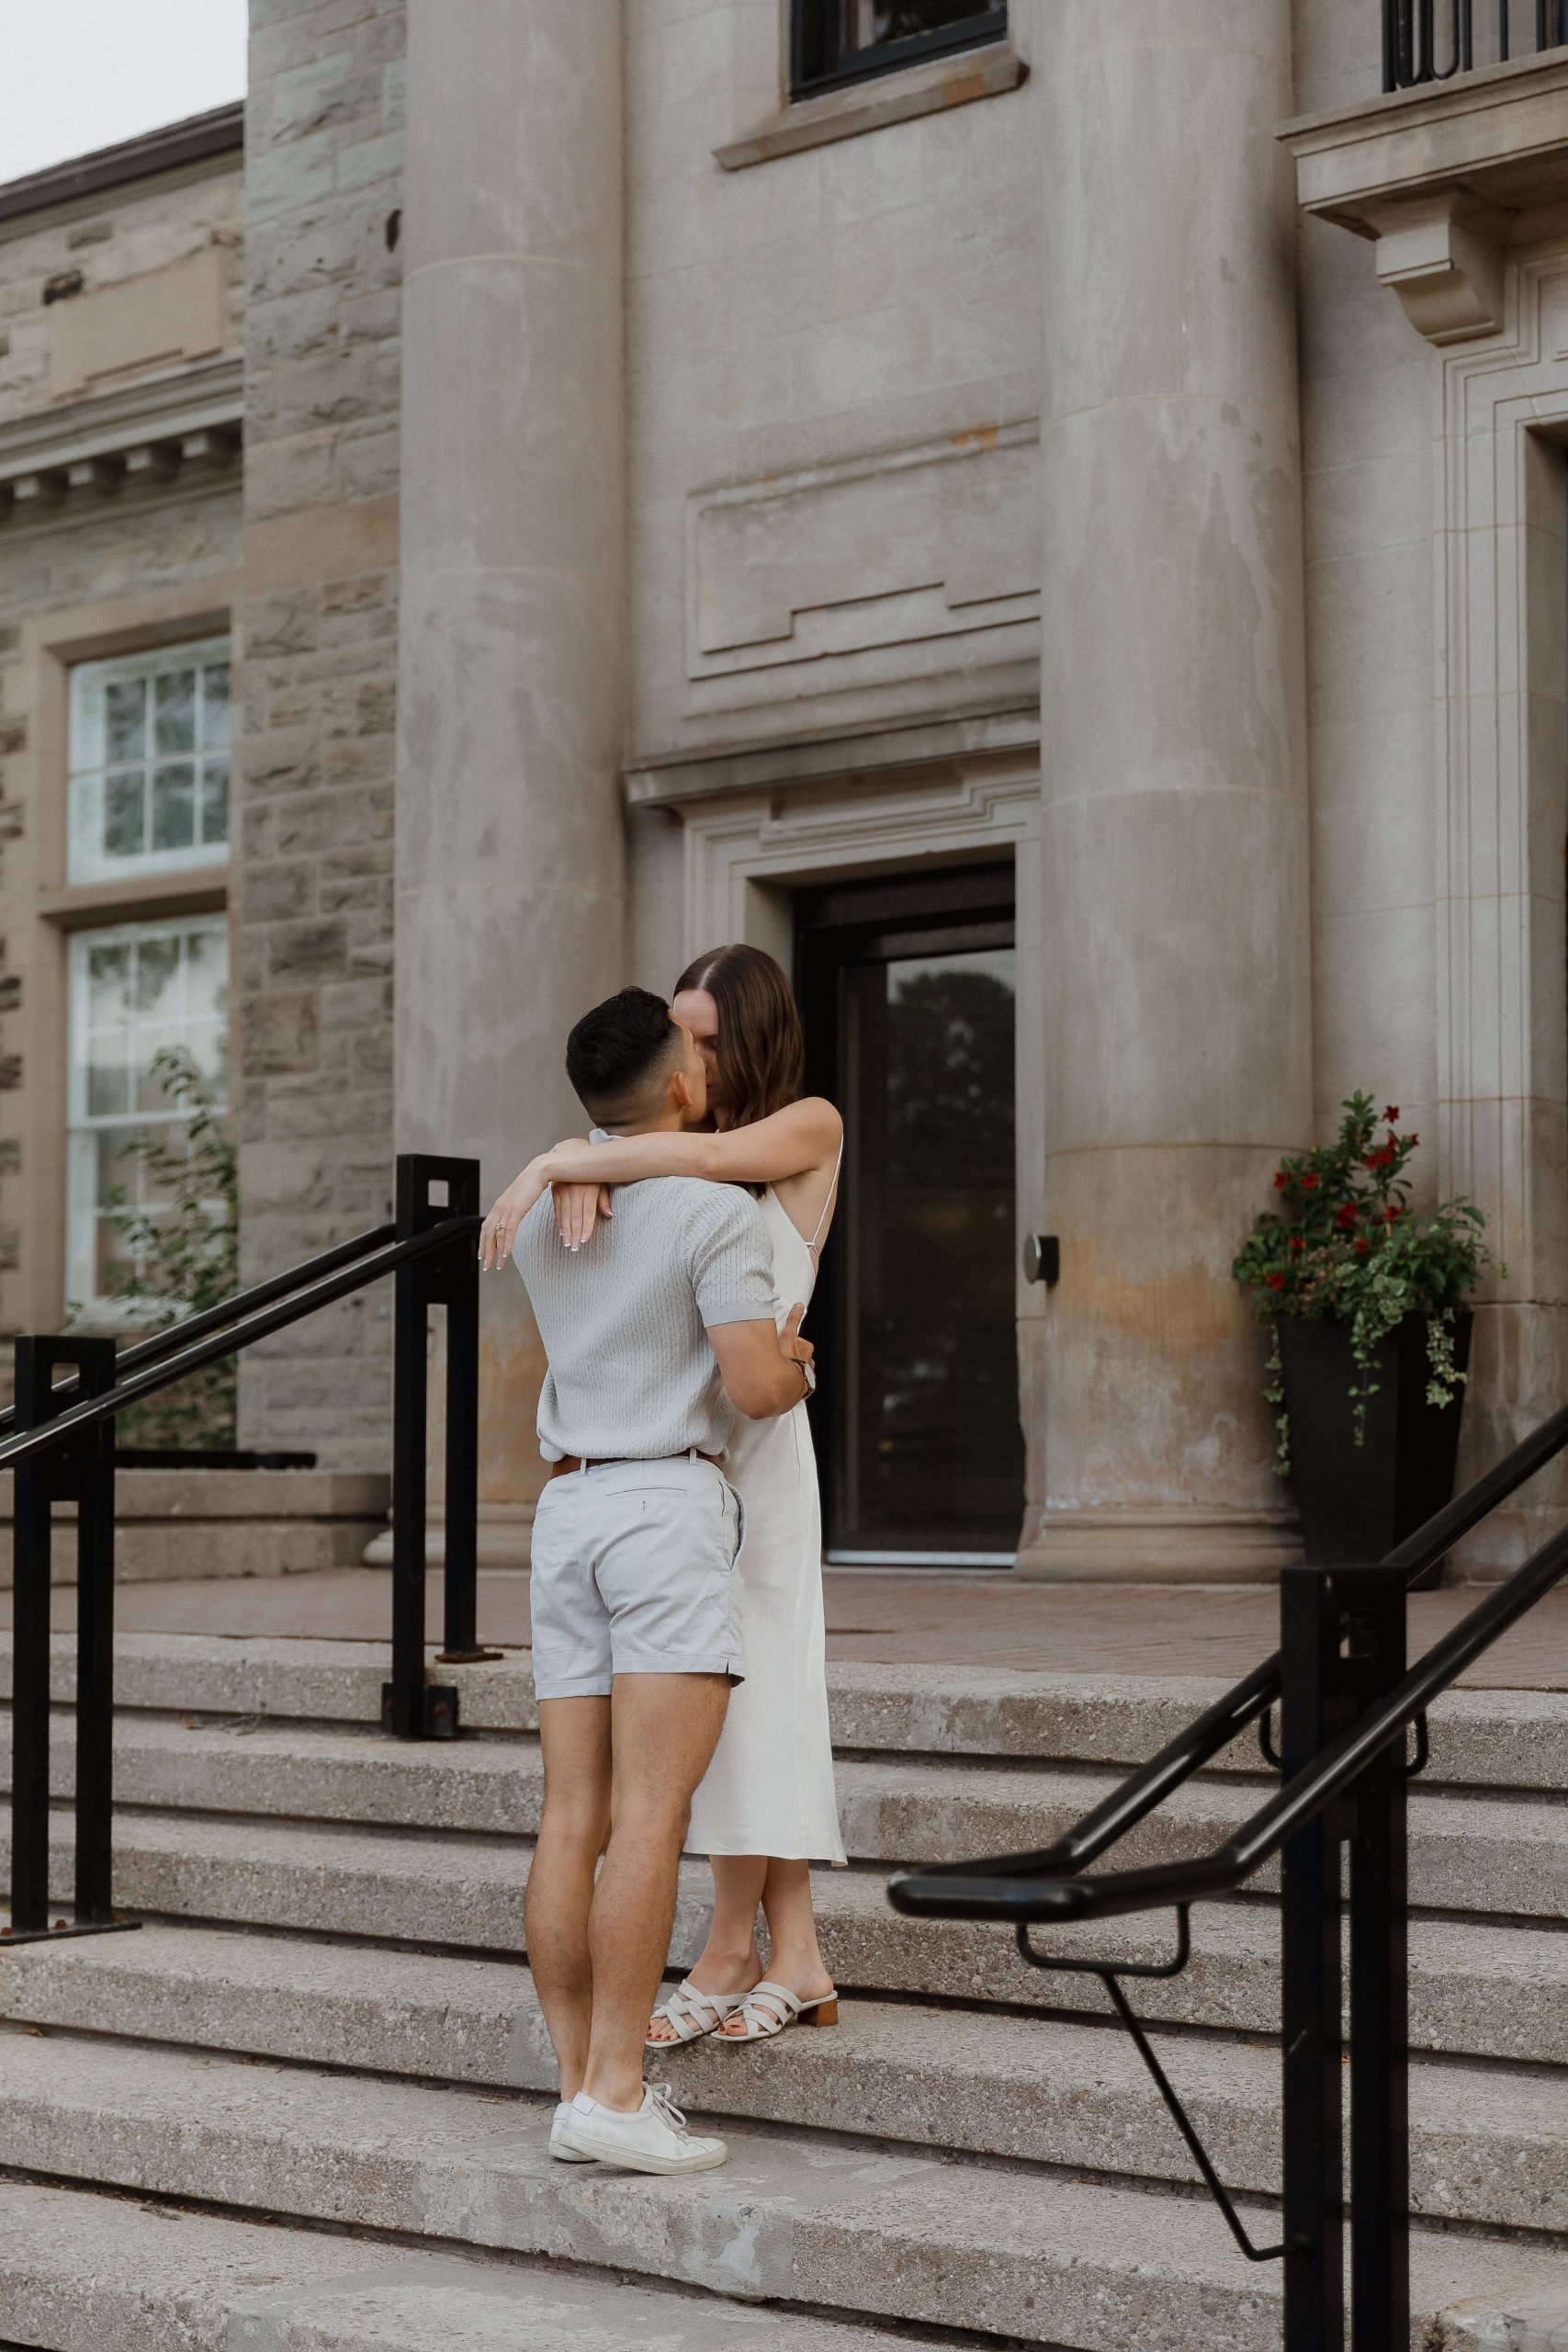 Engagement photos at Guelph University outside the old buildings | Sonia V Photography standing on stairs